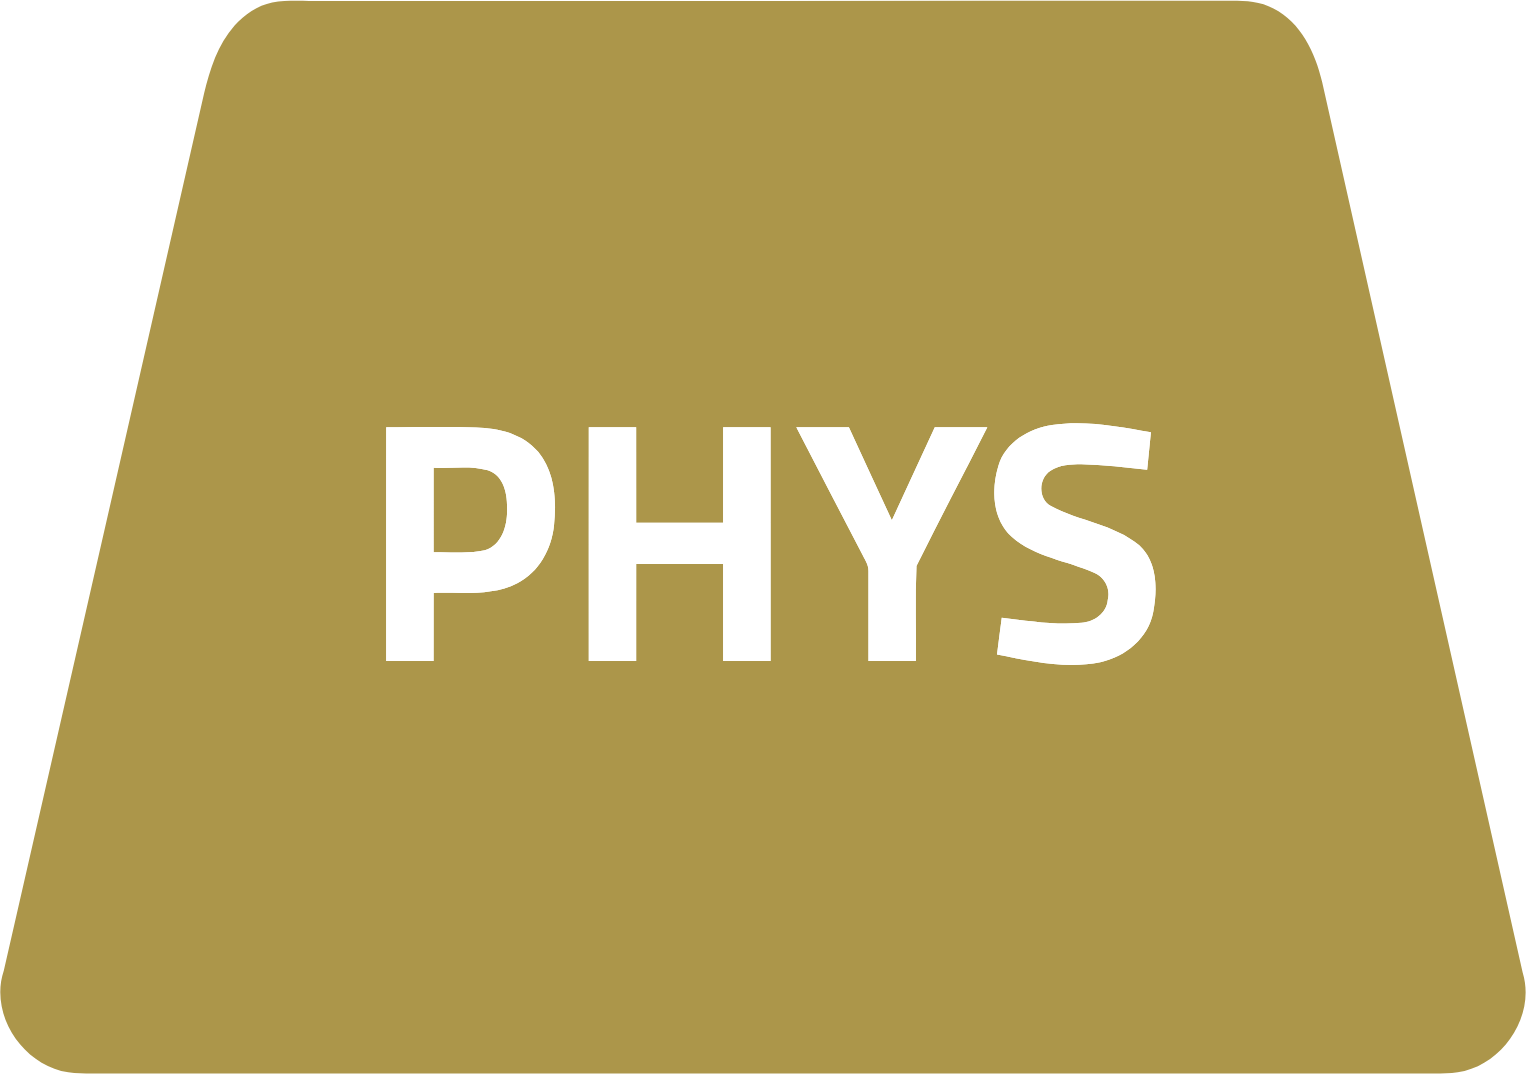 Sprott Physical Gold Trust (PHYS) logo (PNG transparent)